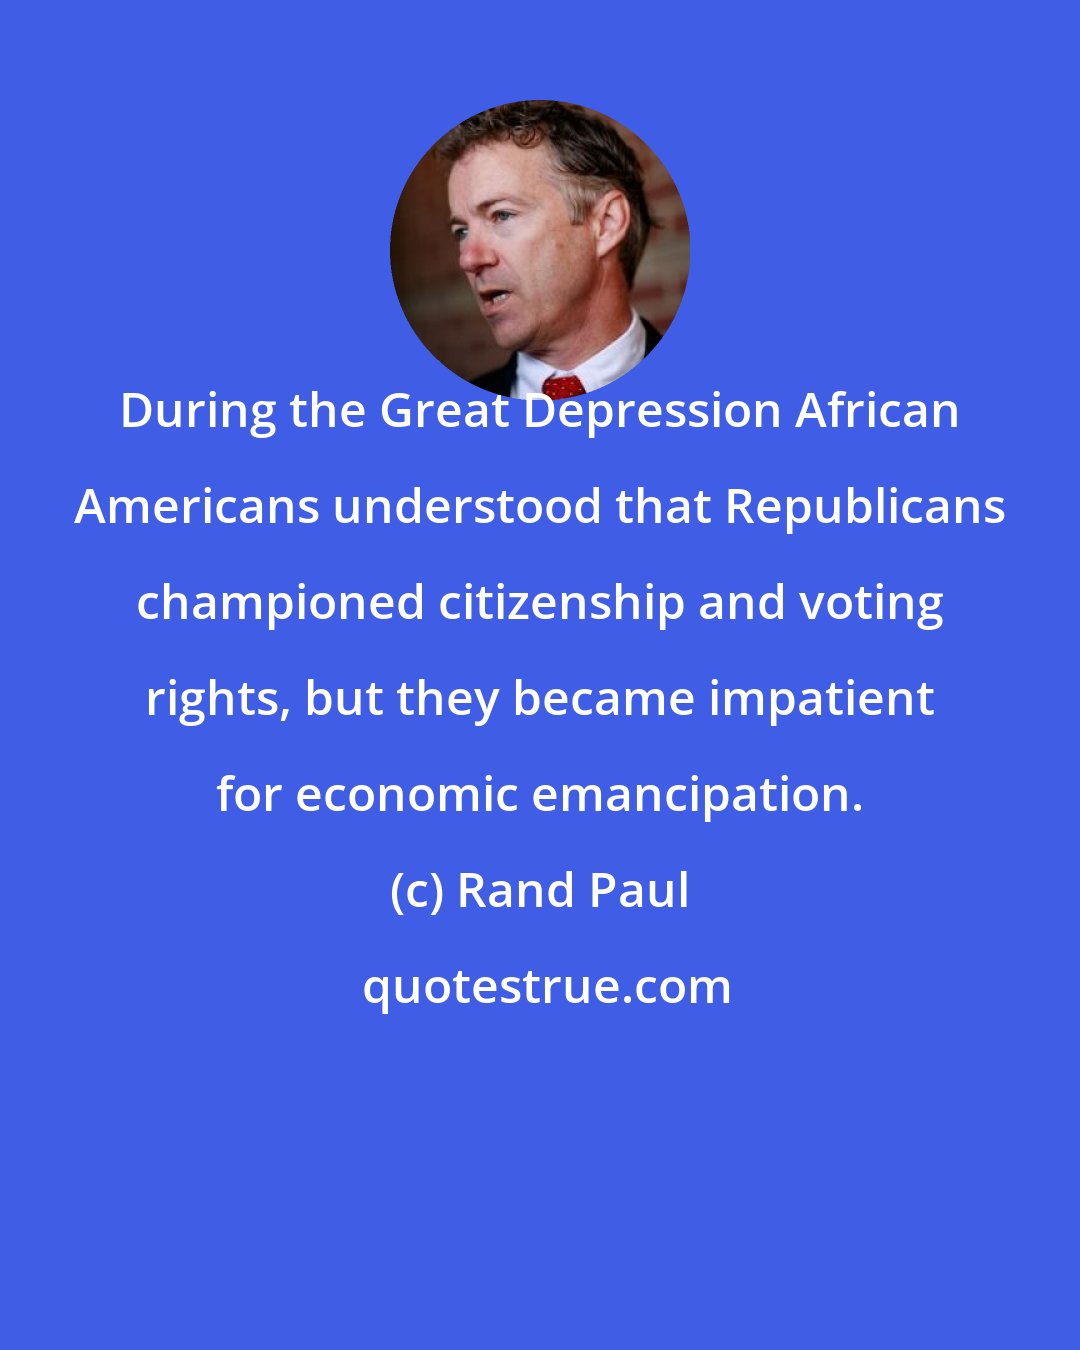 Rand Paul: During the Great Depression African Americans understood that Republicans championed citizenship and voting rights, but they became impatient for economic emancipation.